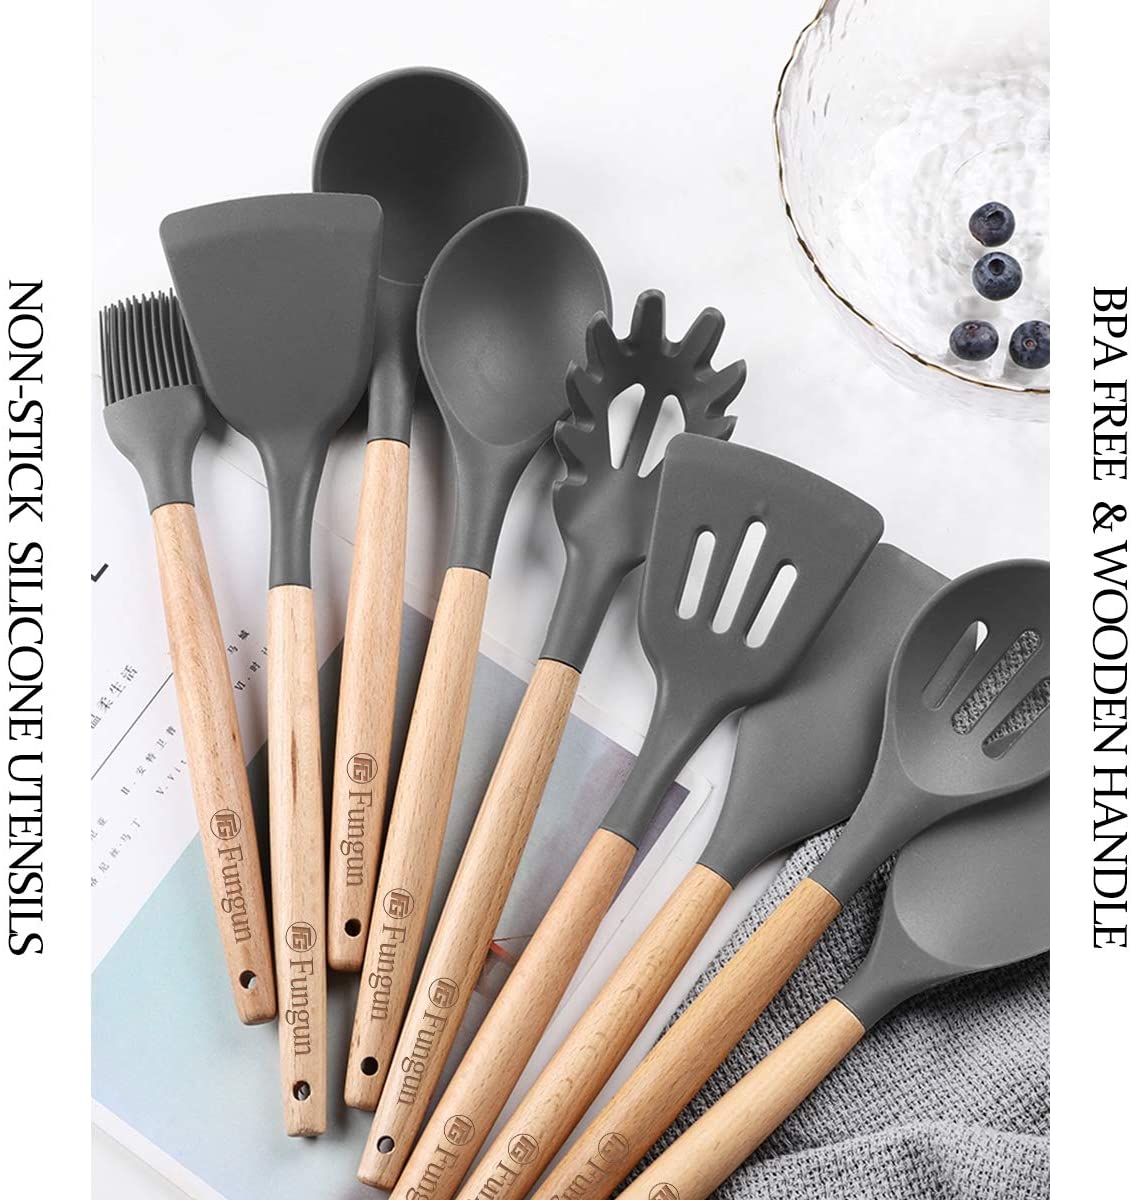 Wooden Handles Heat Resistant & BPA Free & Non-Toxic Kitchen Utensils Spatula Set with Holder Best Kitchen Gadgets Tools for Cookware 34 PCS Silicone Cooking Utensils Set Gray